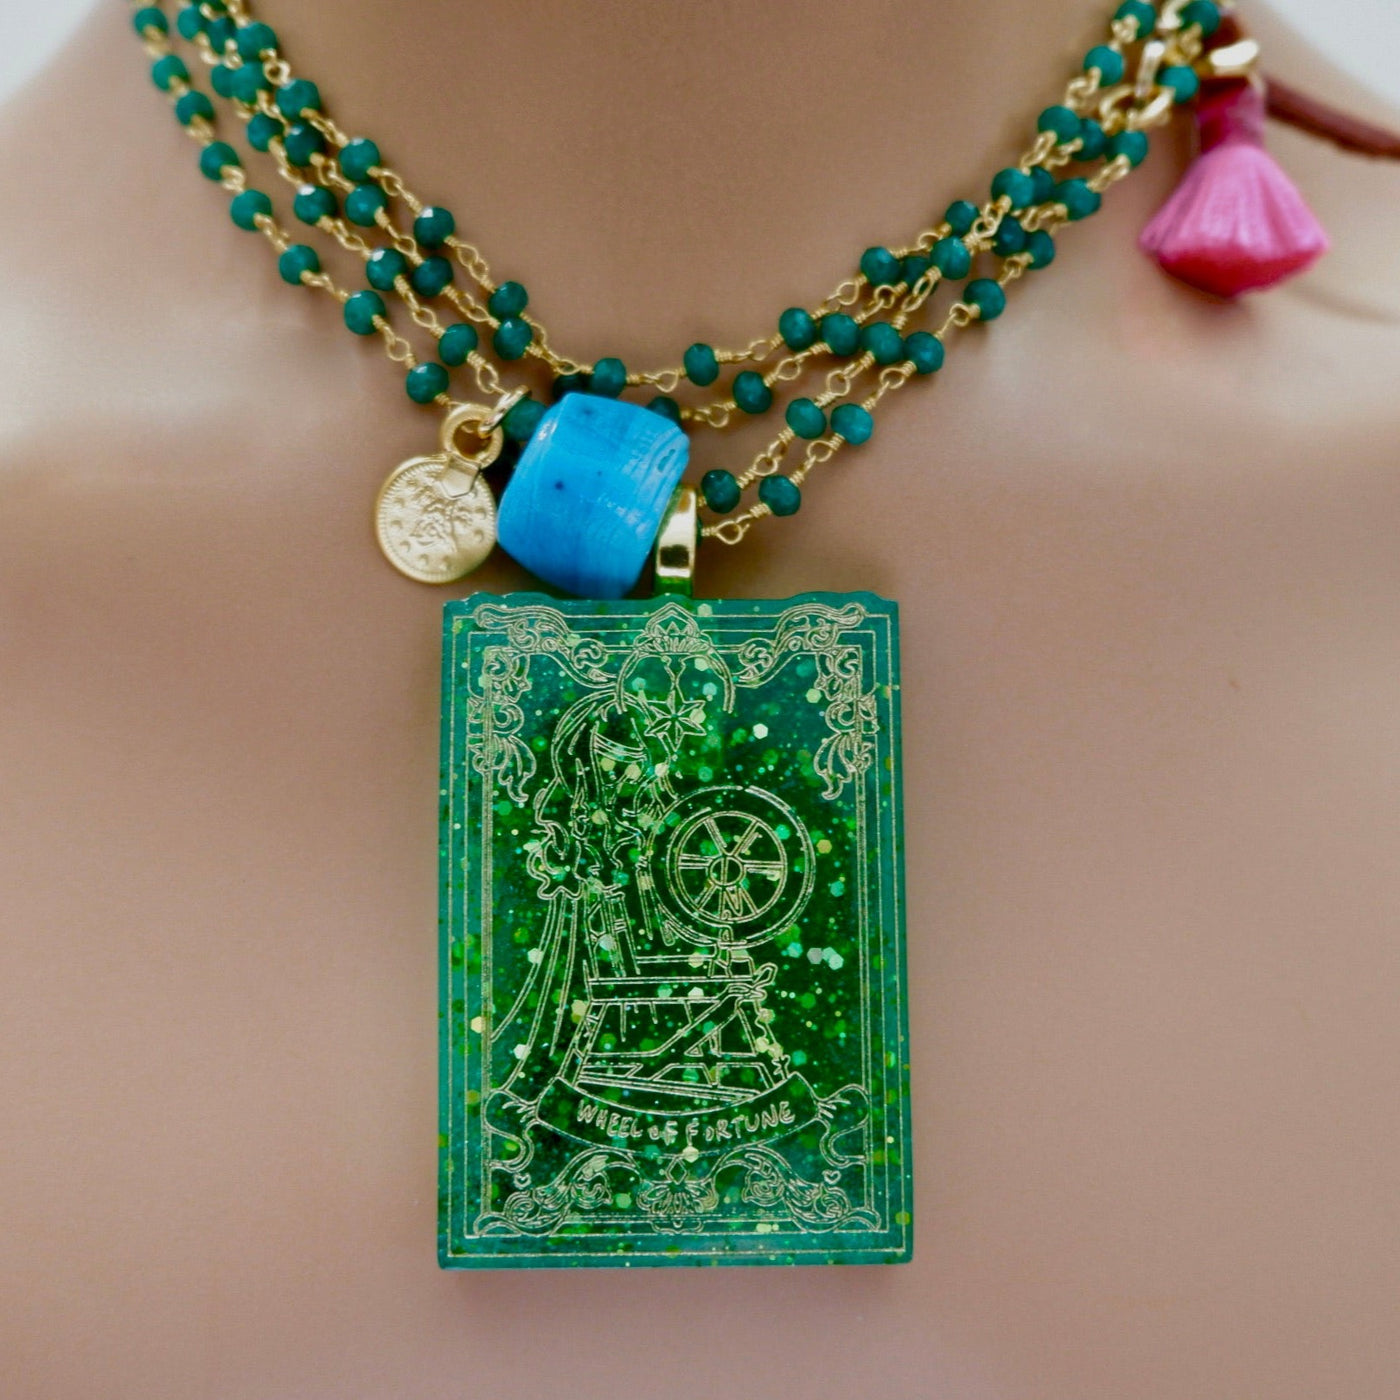 my vintage green necklace